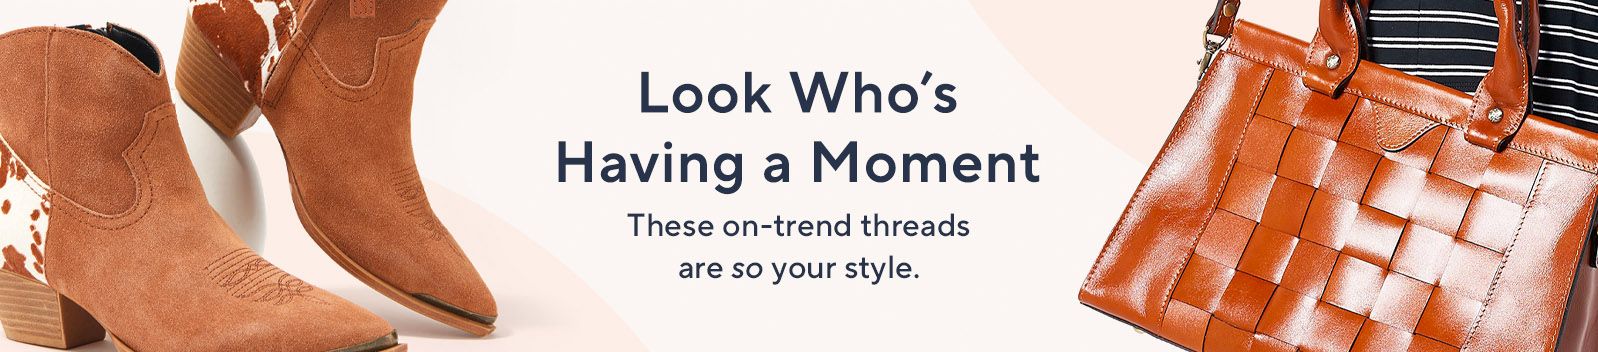 Look Who's Having a Moment. These on-trend threads are so your style.